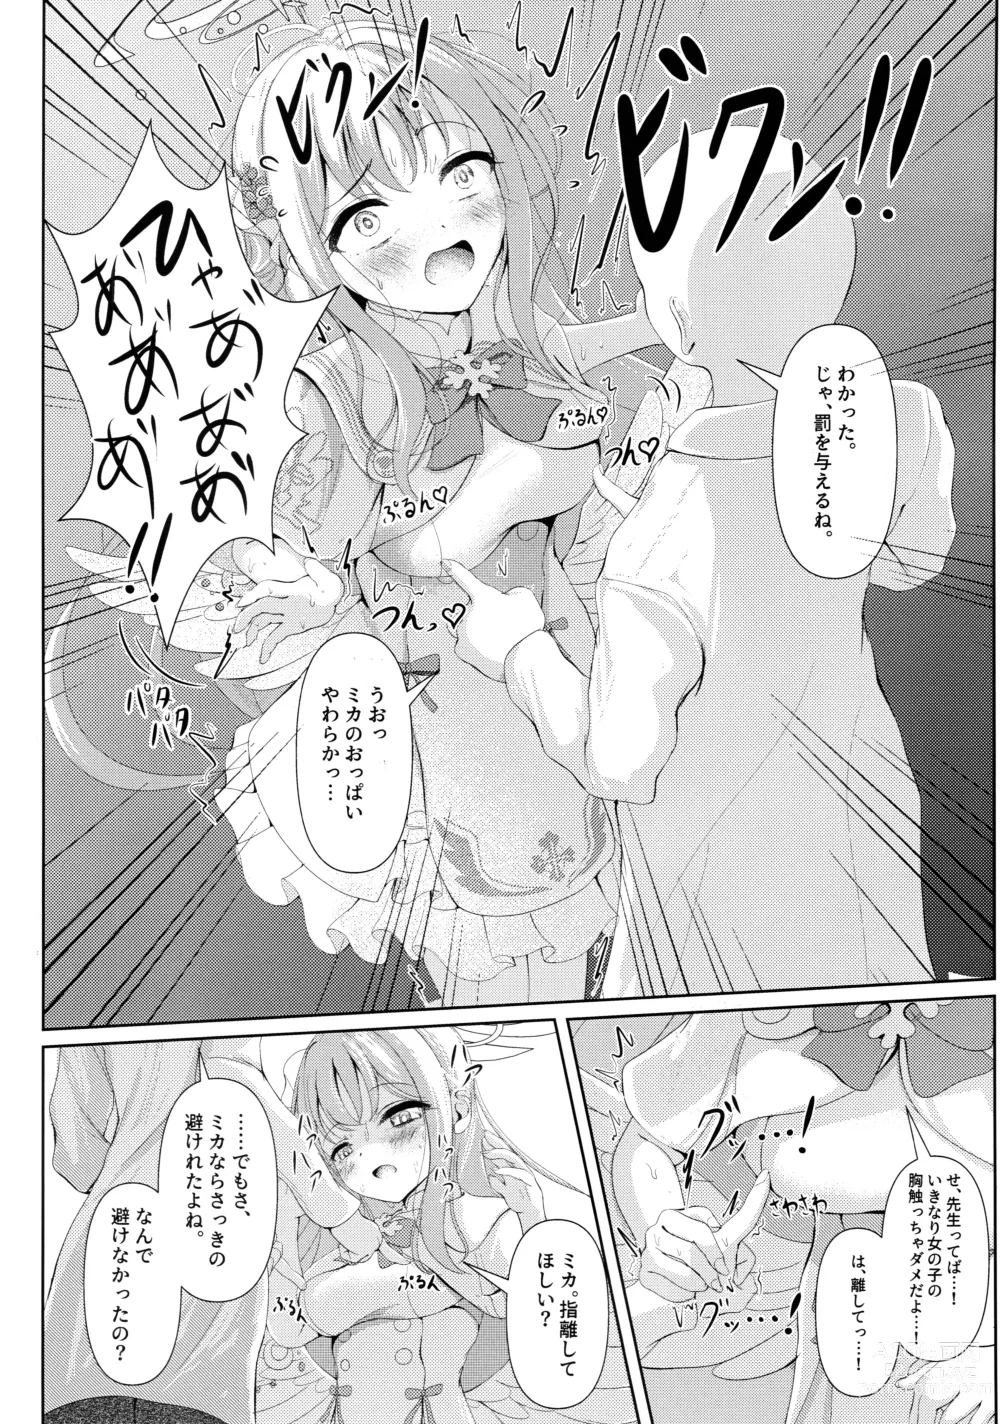 Page 7 of doujinshi Sleeping with the Dear Constellation.